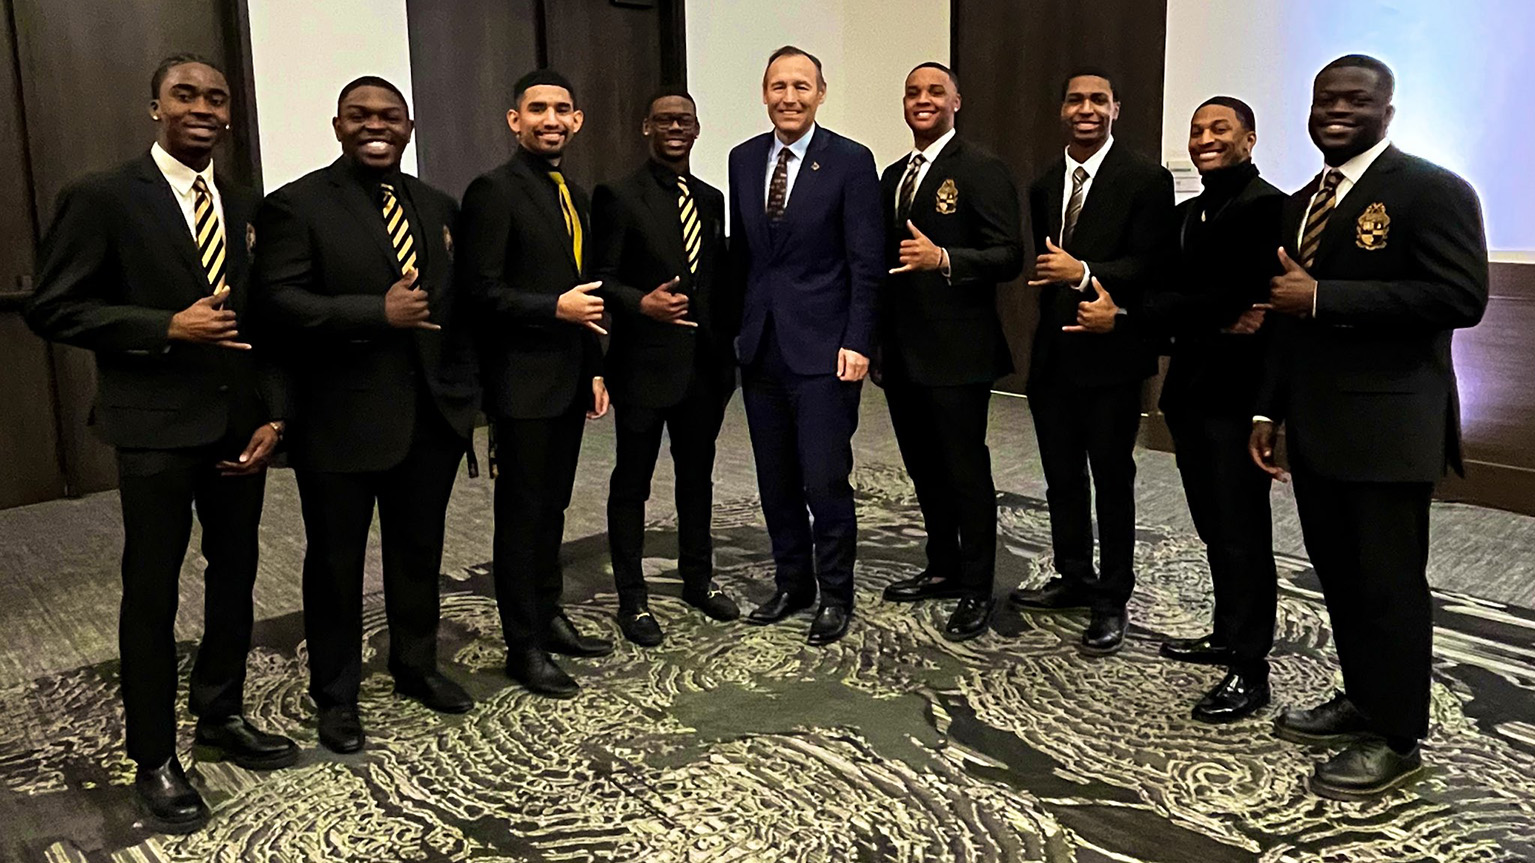 President Damphousse poses for a photo with performers from the MLK Celebration.